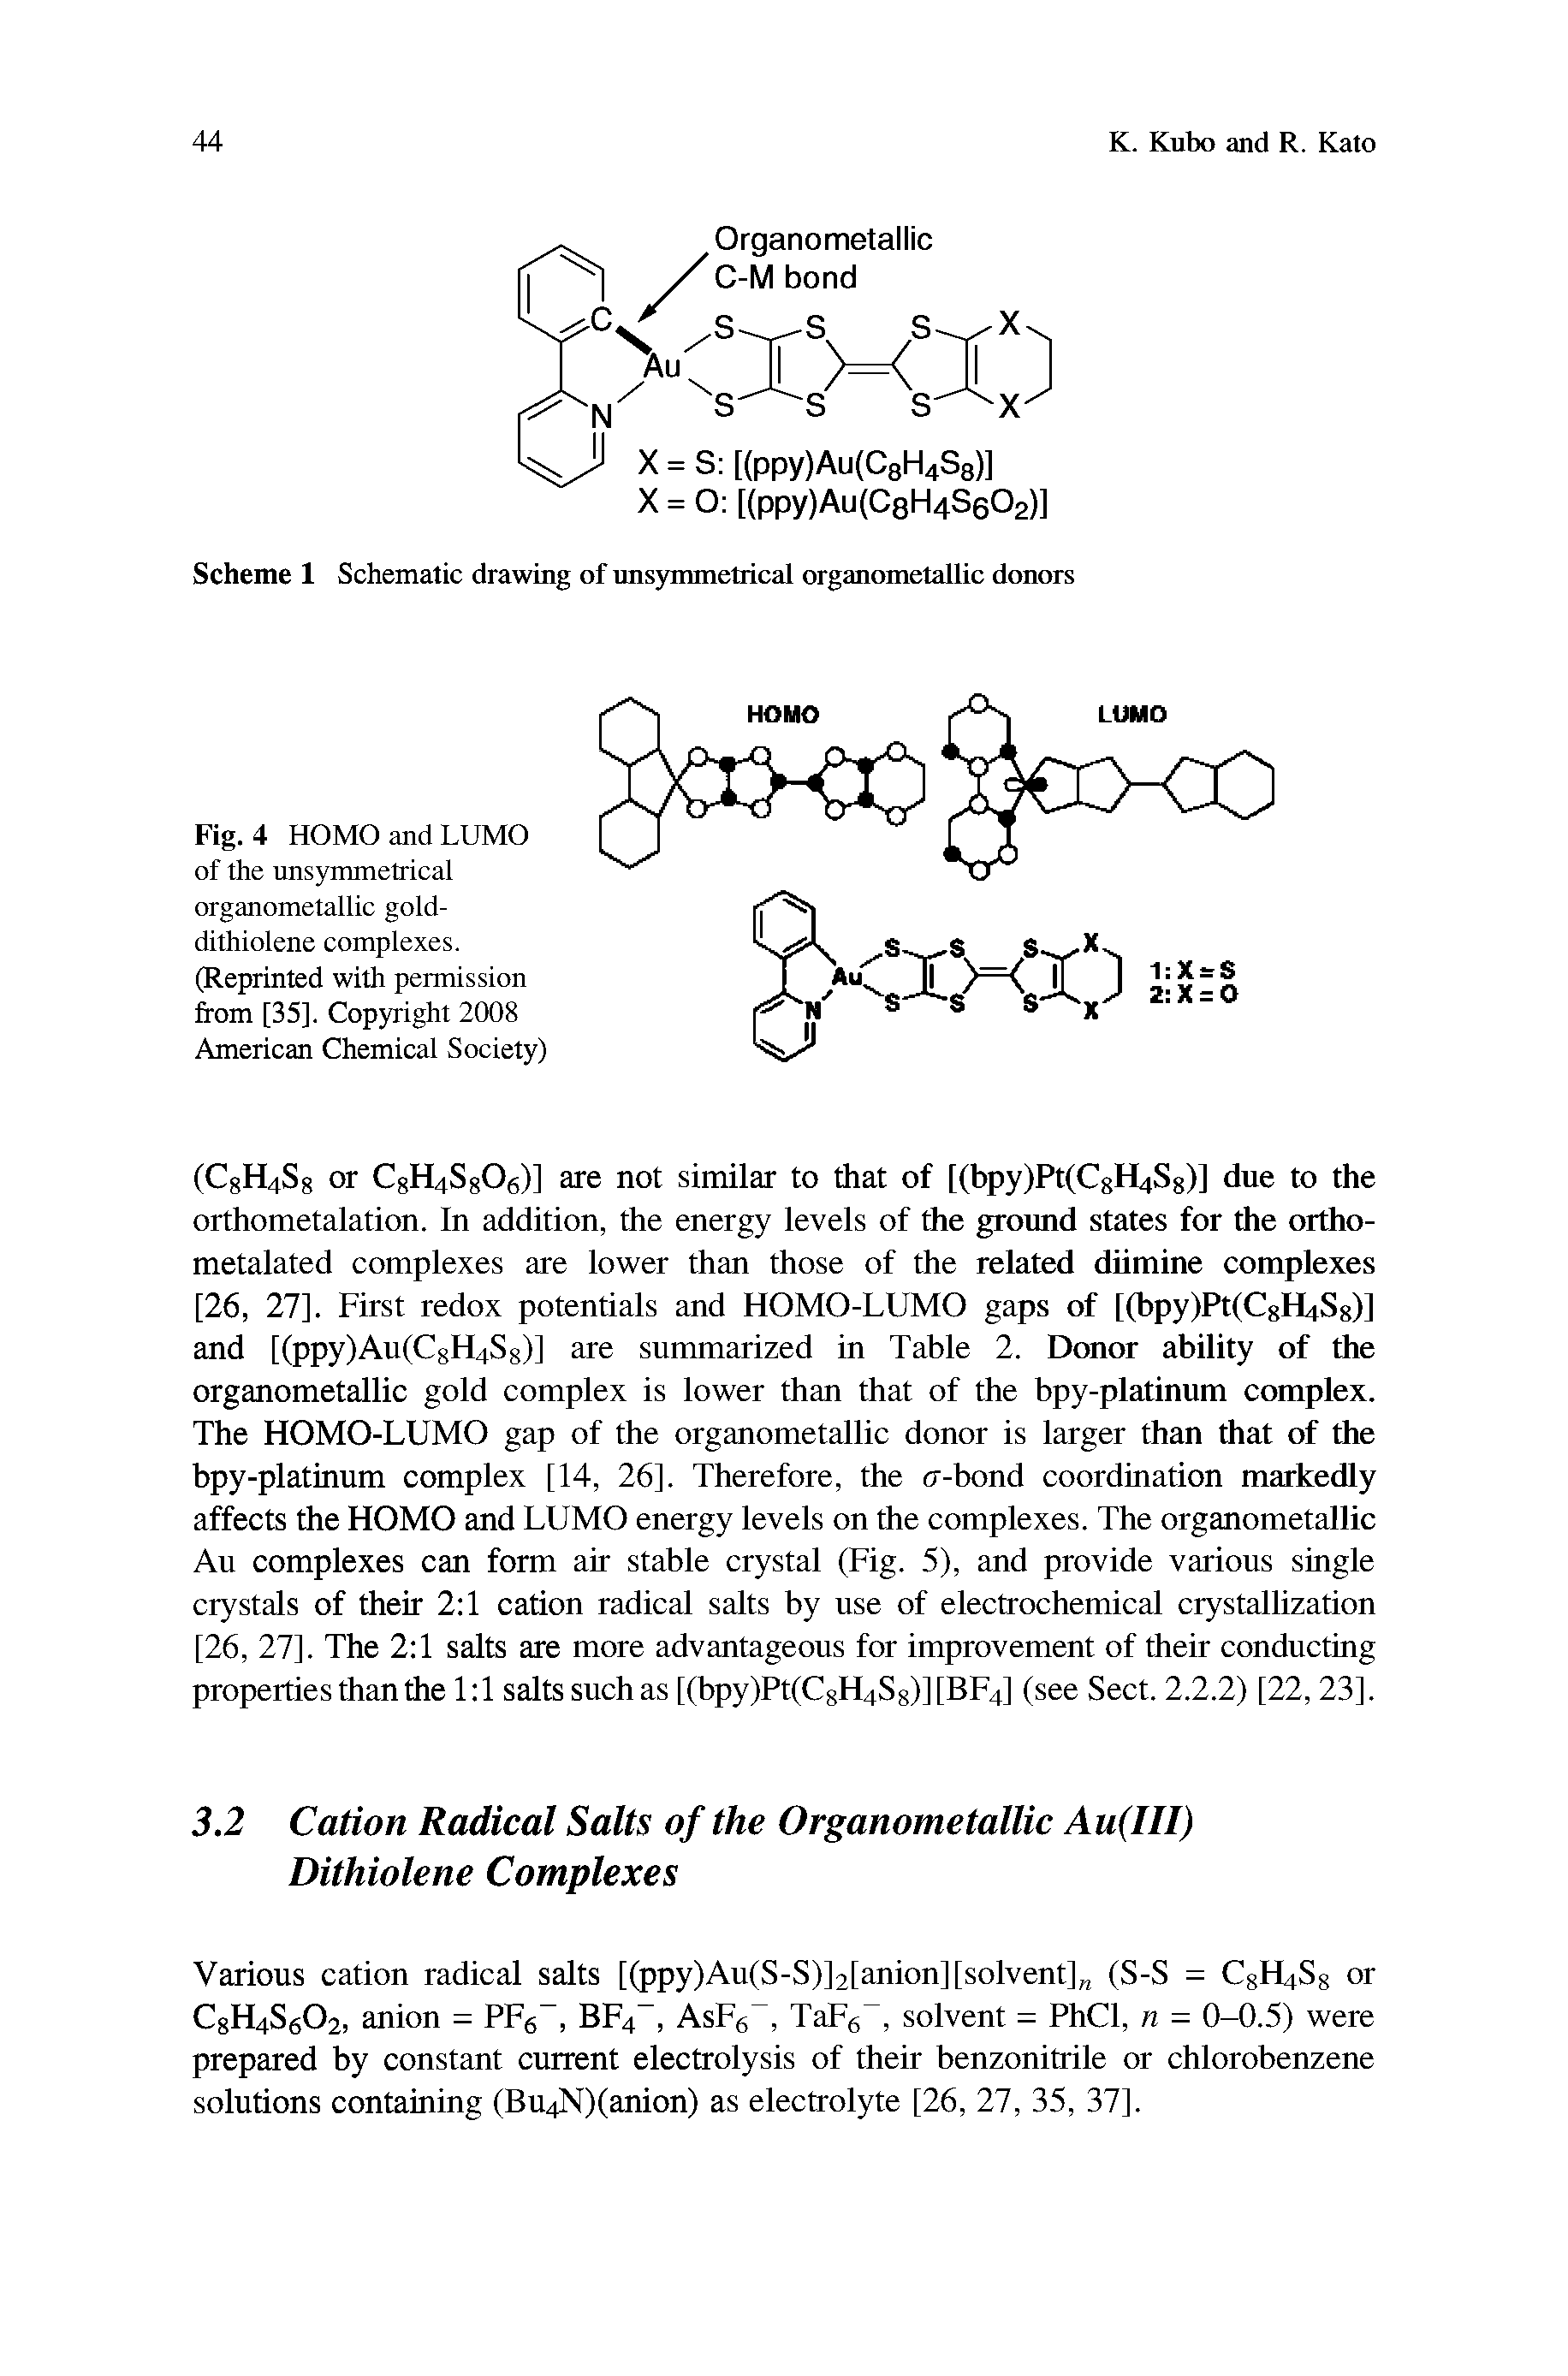 Fig. 4 HOMO and LUMO of the unsymmetrical organometallic gold-dithiolene complexes. (Reprinted with permission from [35]. Copyright 2008 American Chemical Society)...